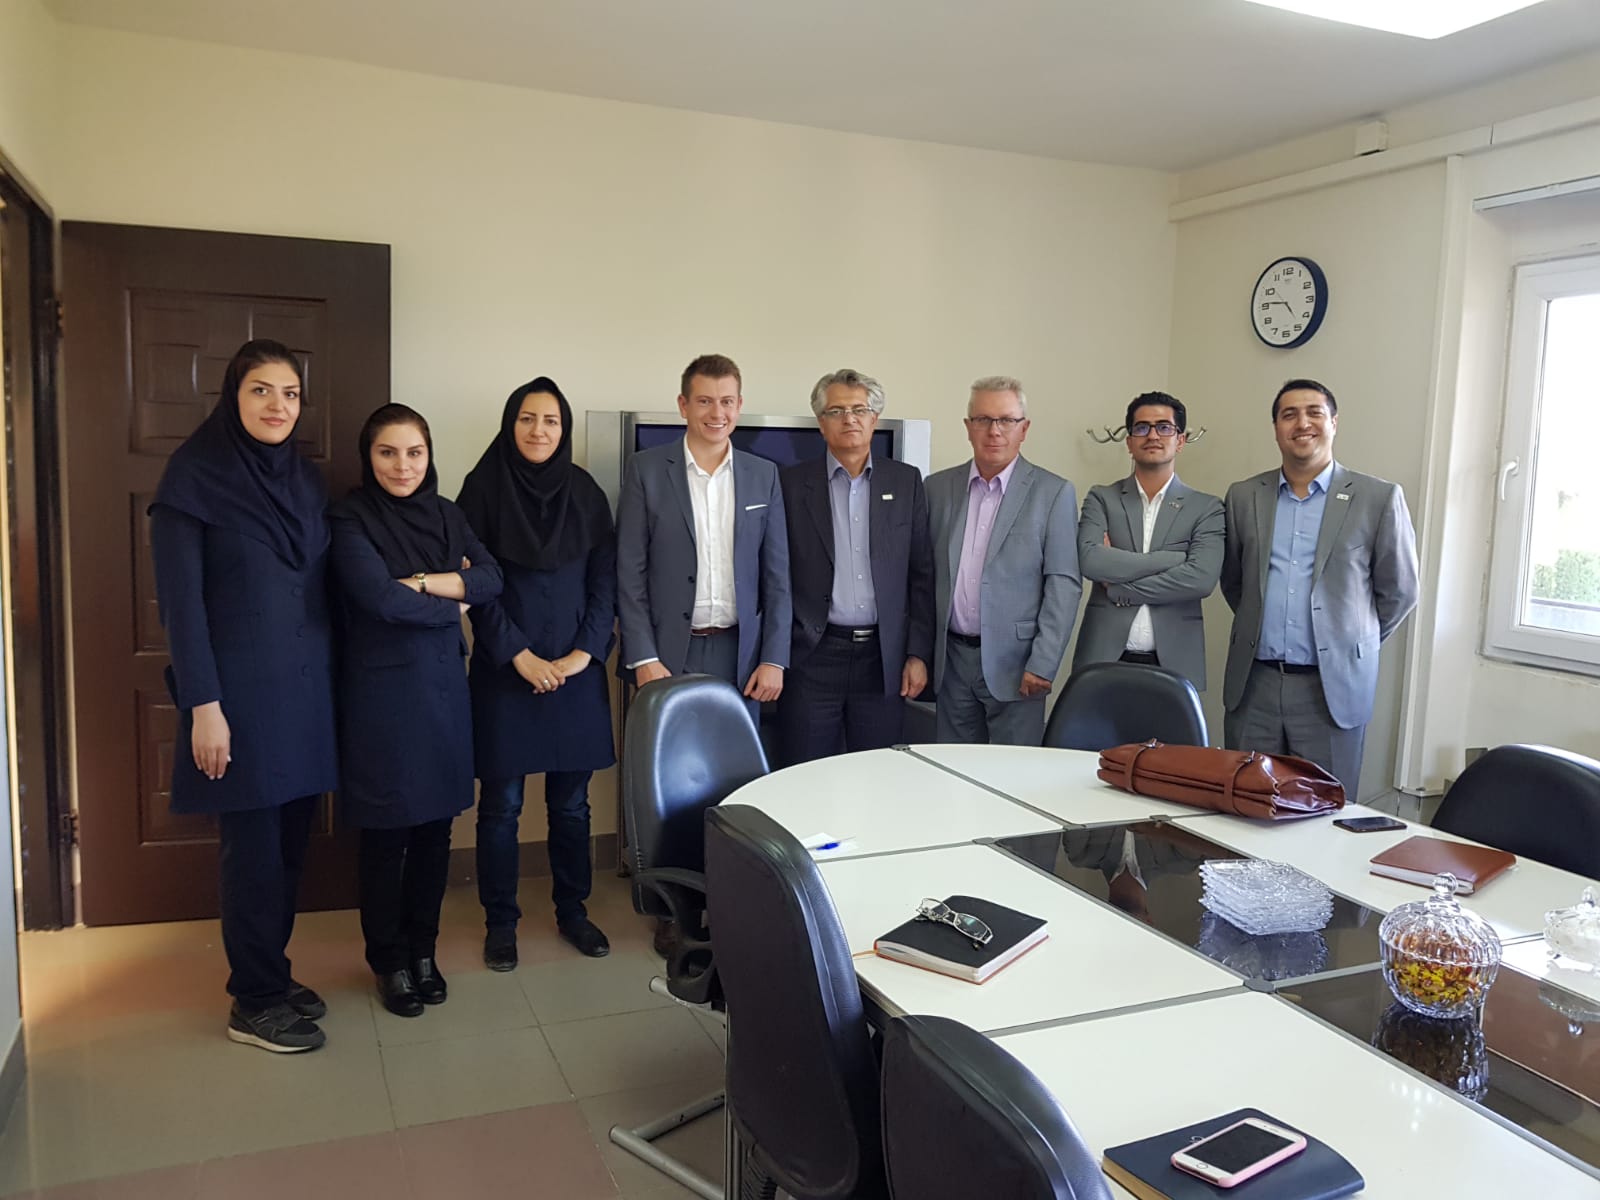 Participants of the meeting of representatives of sales department of Iran Transfo Corp. and Izolyator plant